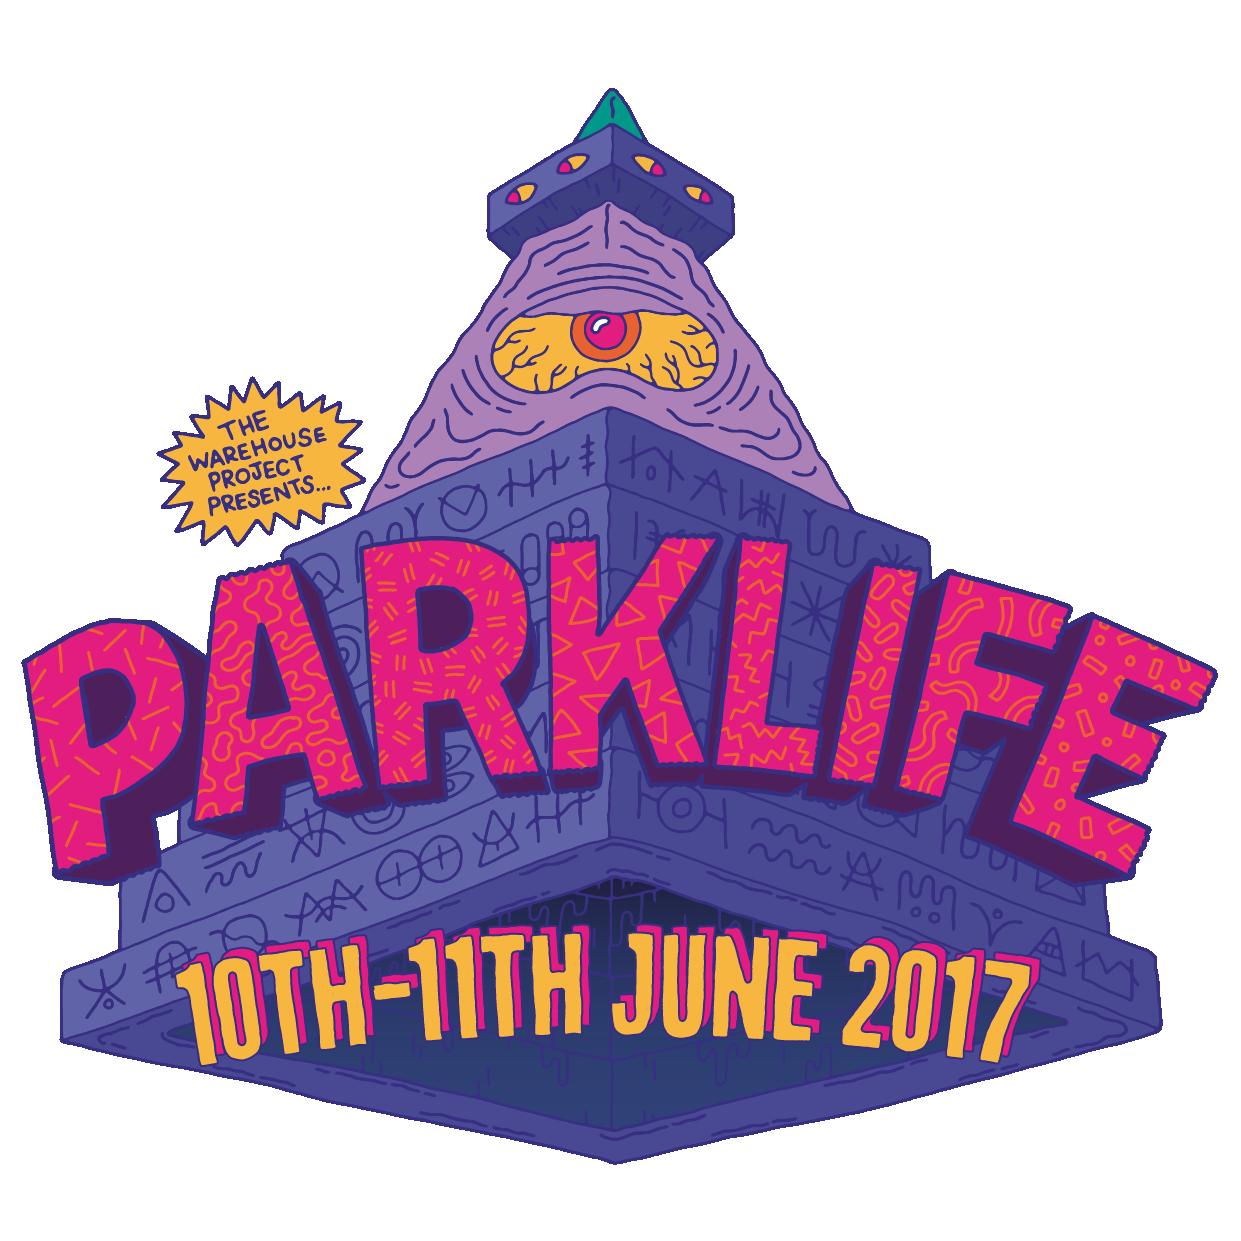 Win your way into Parklife Festival 2017 - Capital Yorkshire